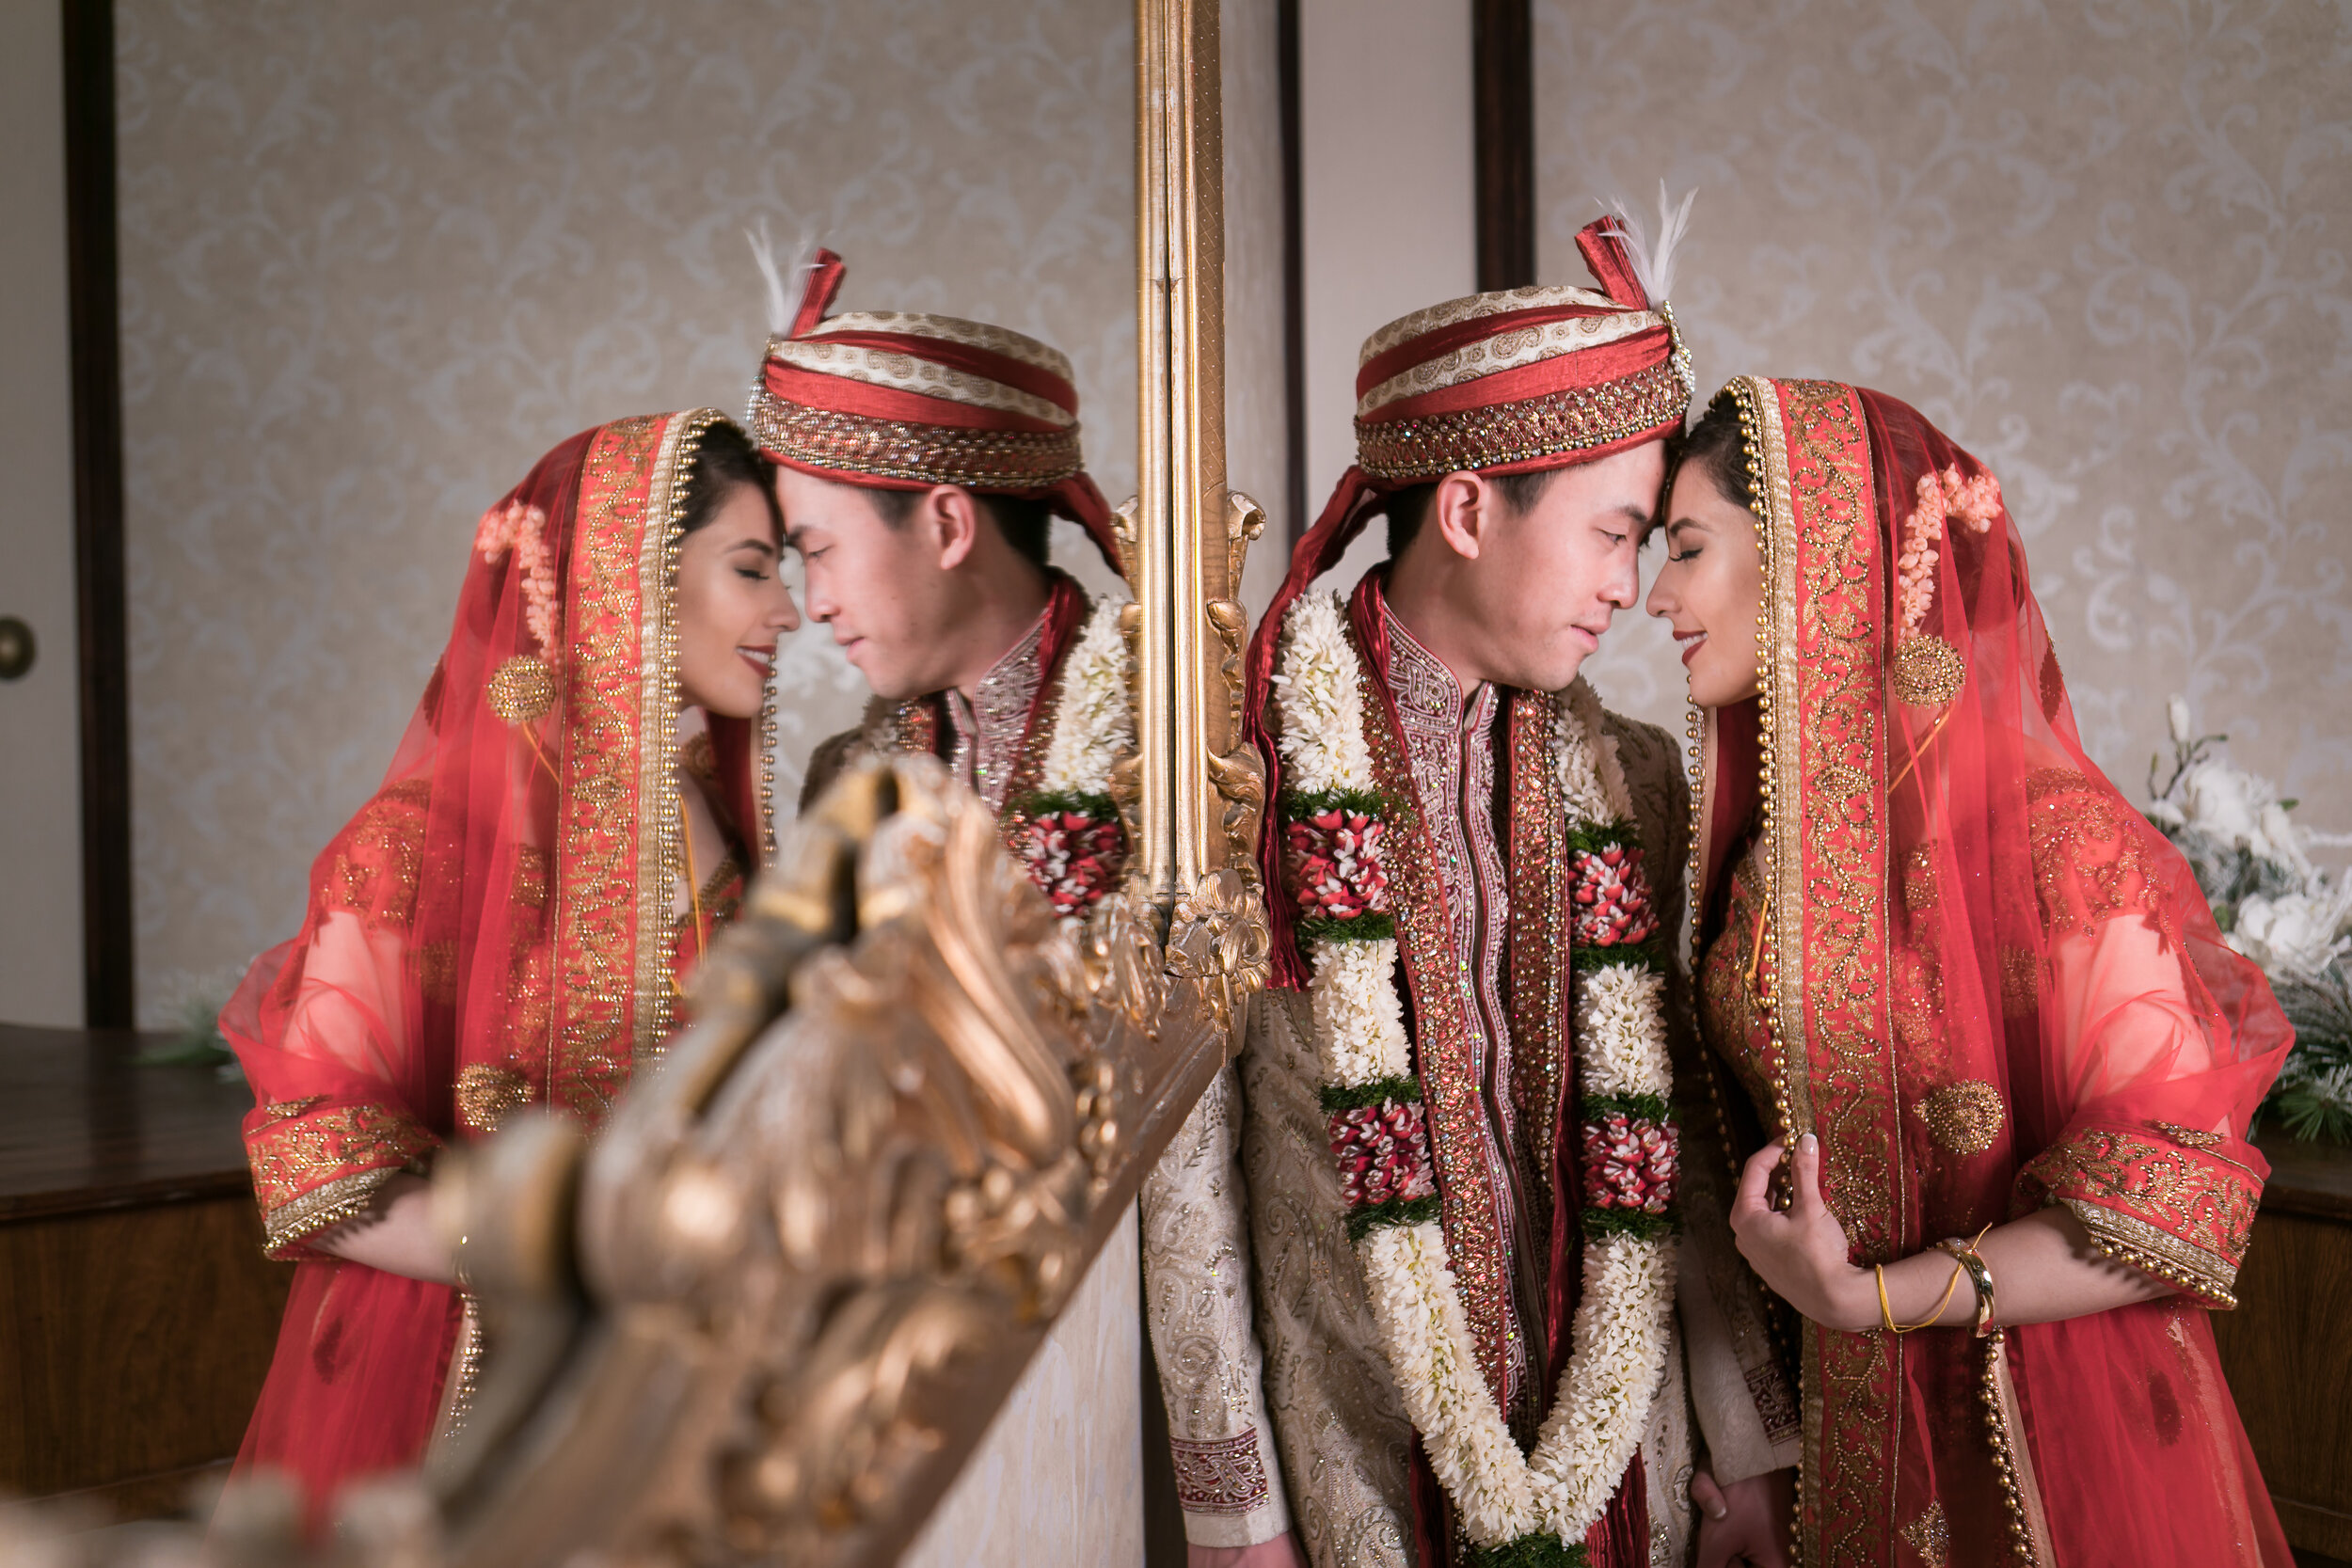 South East Asian New York City (NYC) Wedding Photographer Angelica Criscuolo Photography